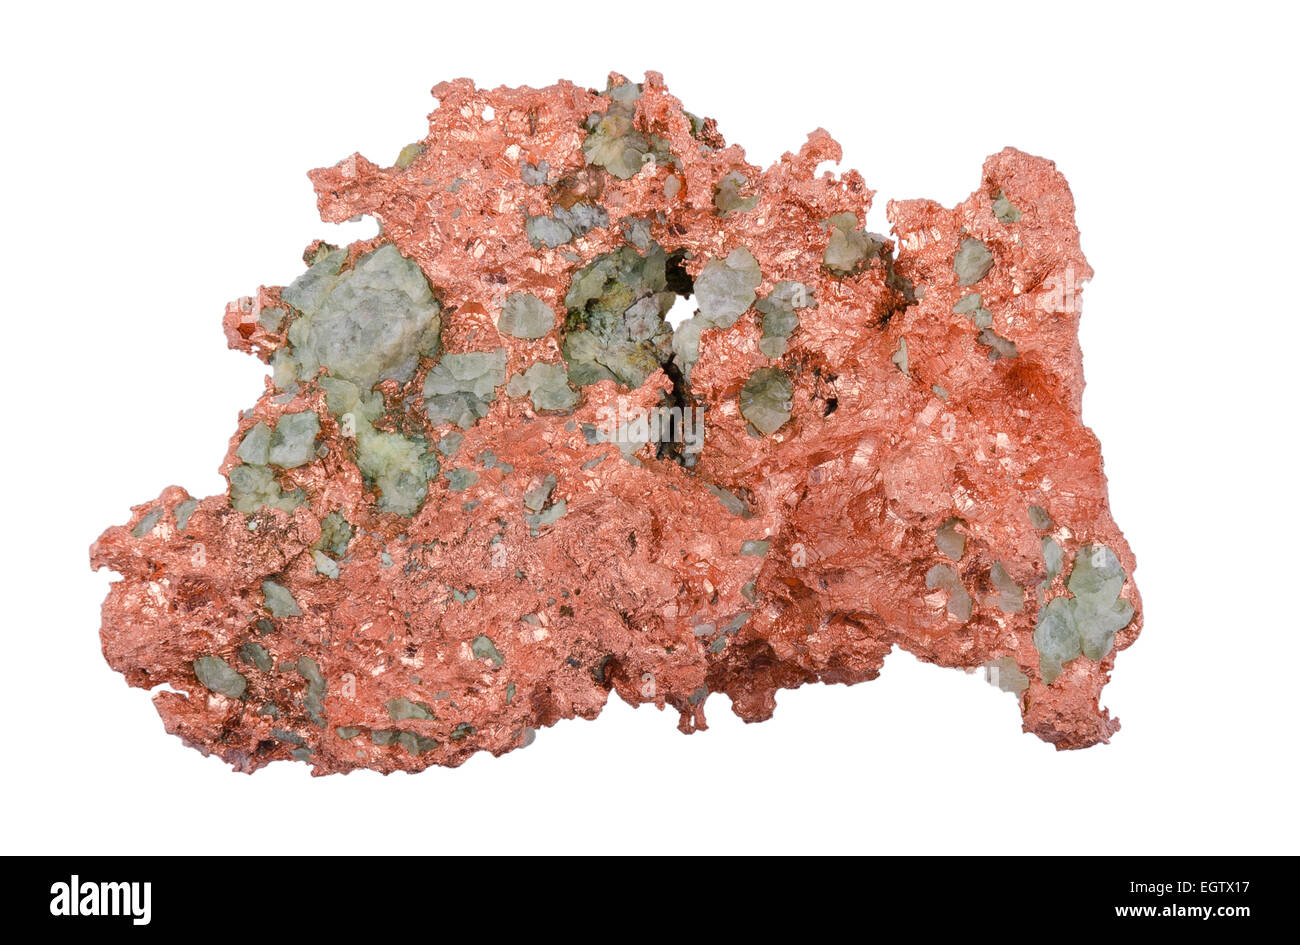 Native Copper From Above Over White Background Stock Photo